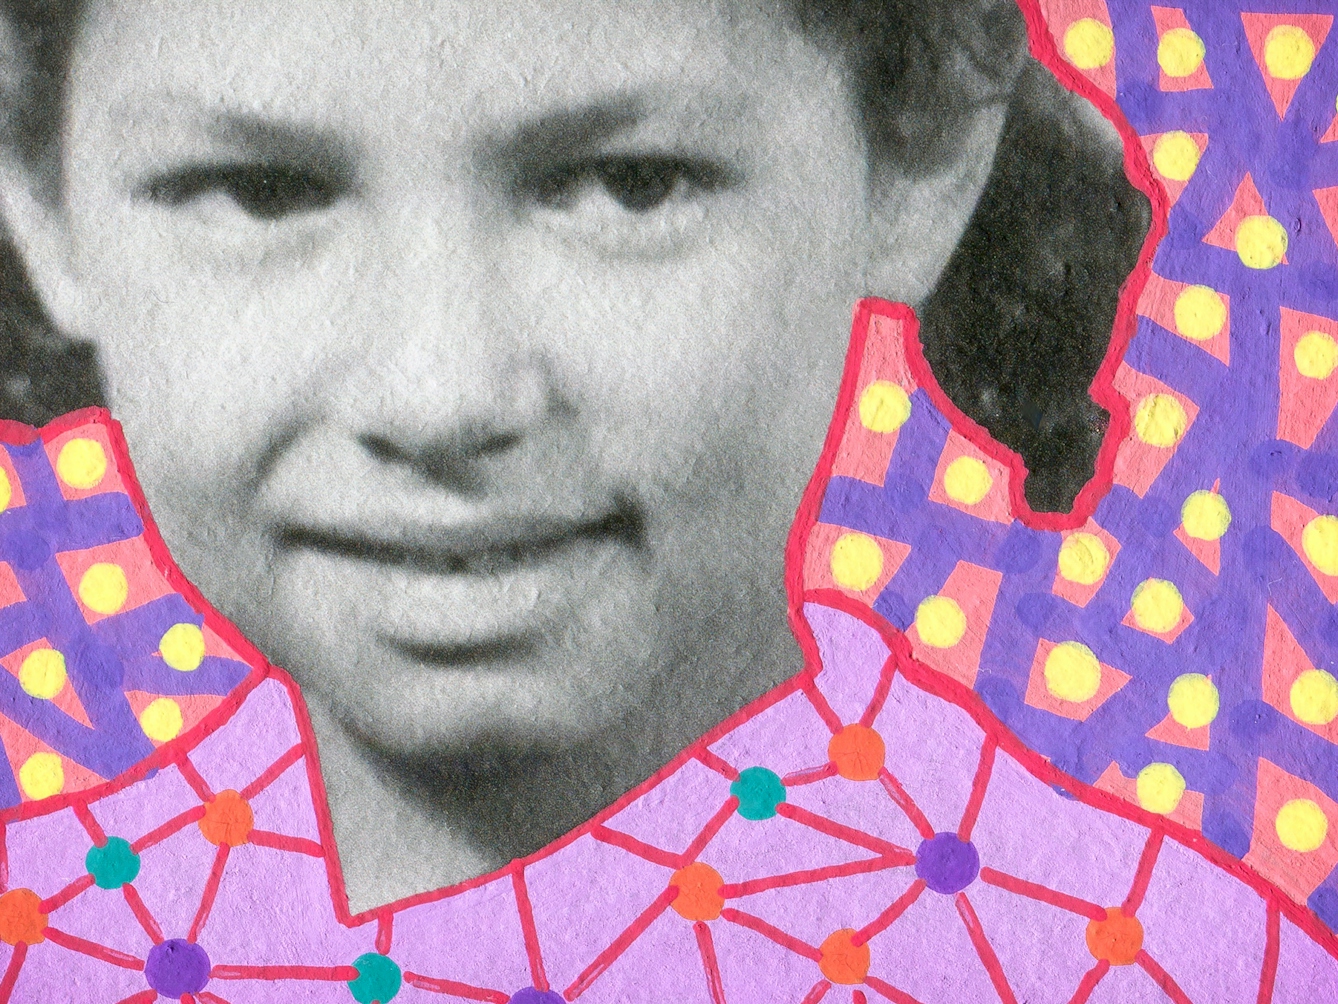 Artwork created by painting over the surface of a black and white photographic print with colourful paint. The artwork shows the original head of a young girl from the photograph beneath. The girl's face is pictured close up and she is smiling off to the right of camera. Apart from her head and face, the rest of the image is a painted red background covered in small yellow dots and thick purple lines crisscrossing the background. The girl's clothes are painted differently, with a light purple background, covered in orange, green and dark purple dots, linked together by straight red lines. The texture of the paint can be seen, including the boundary between the painted area and the original photographic print.